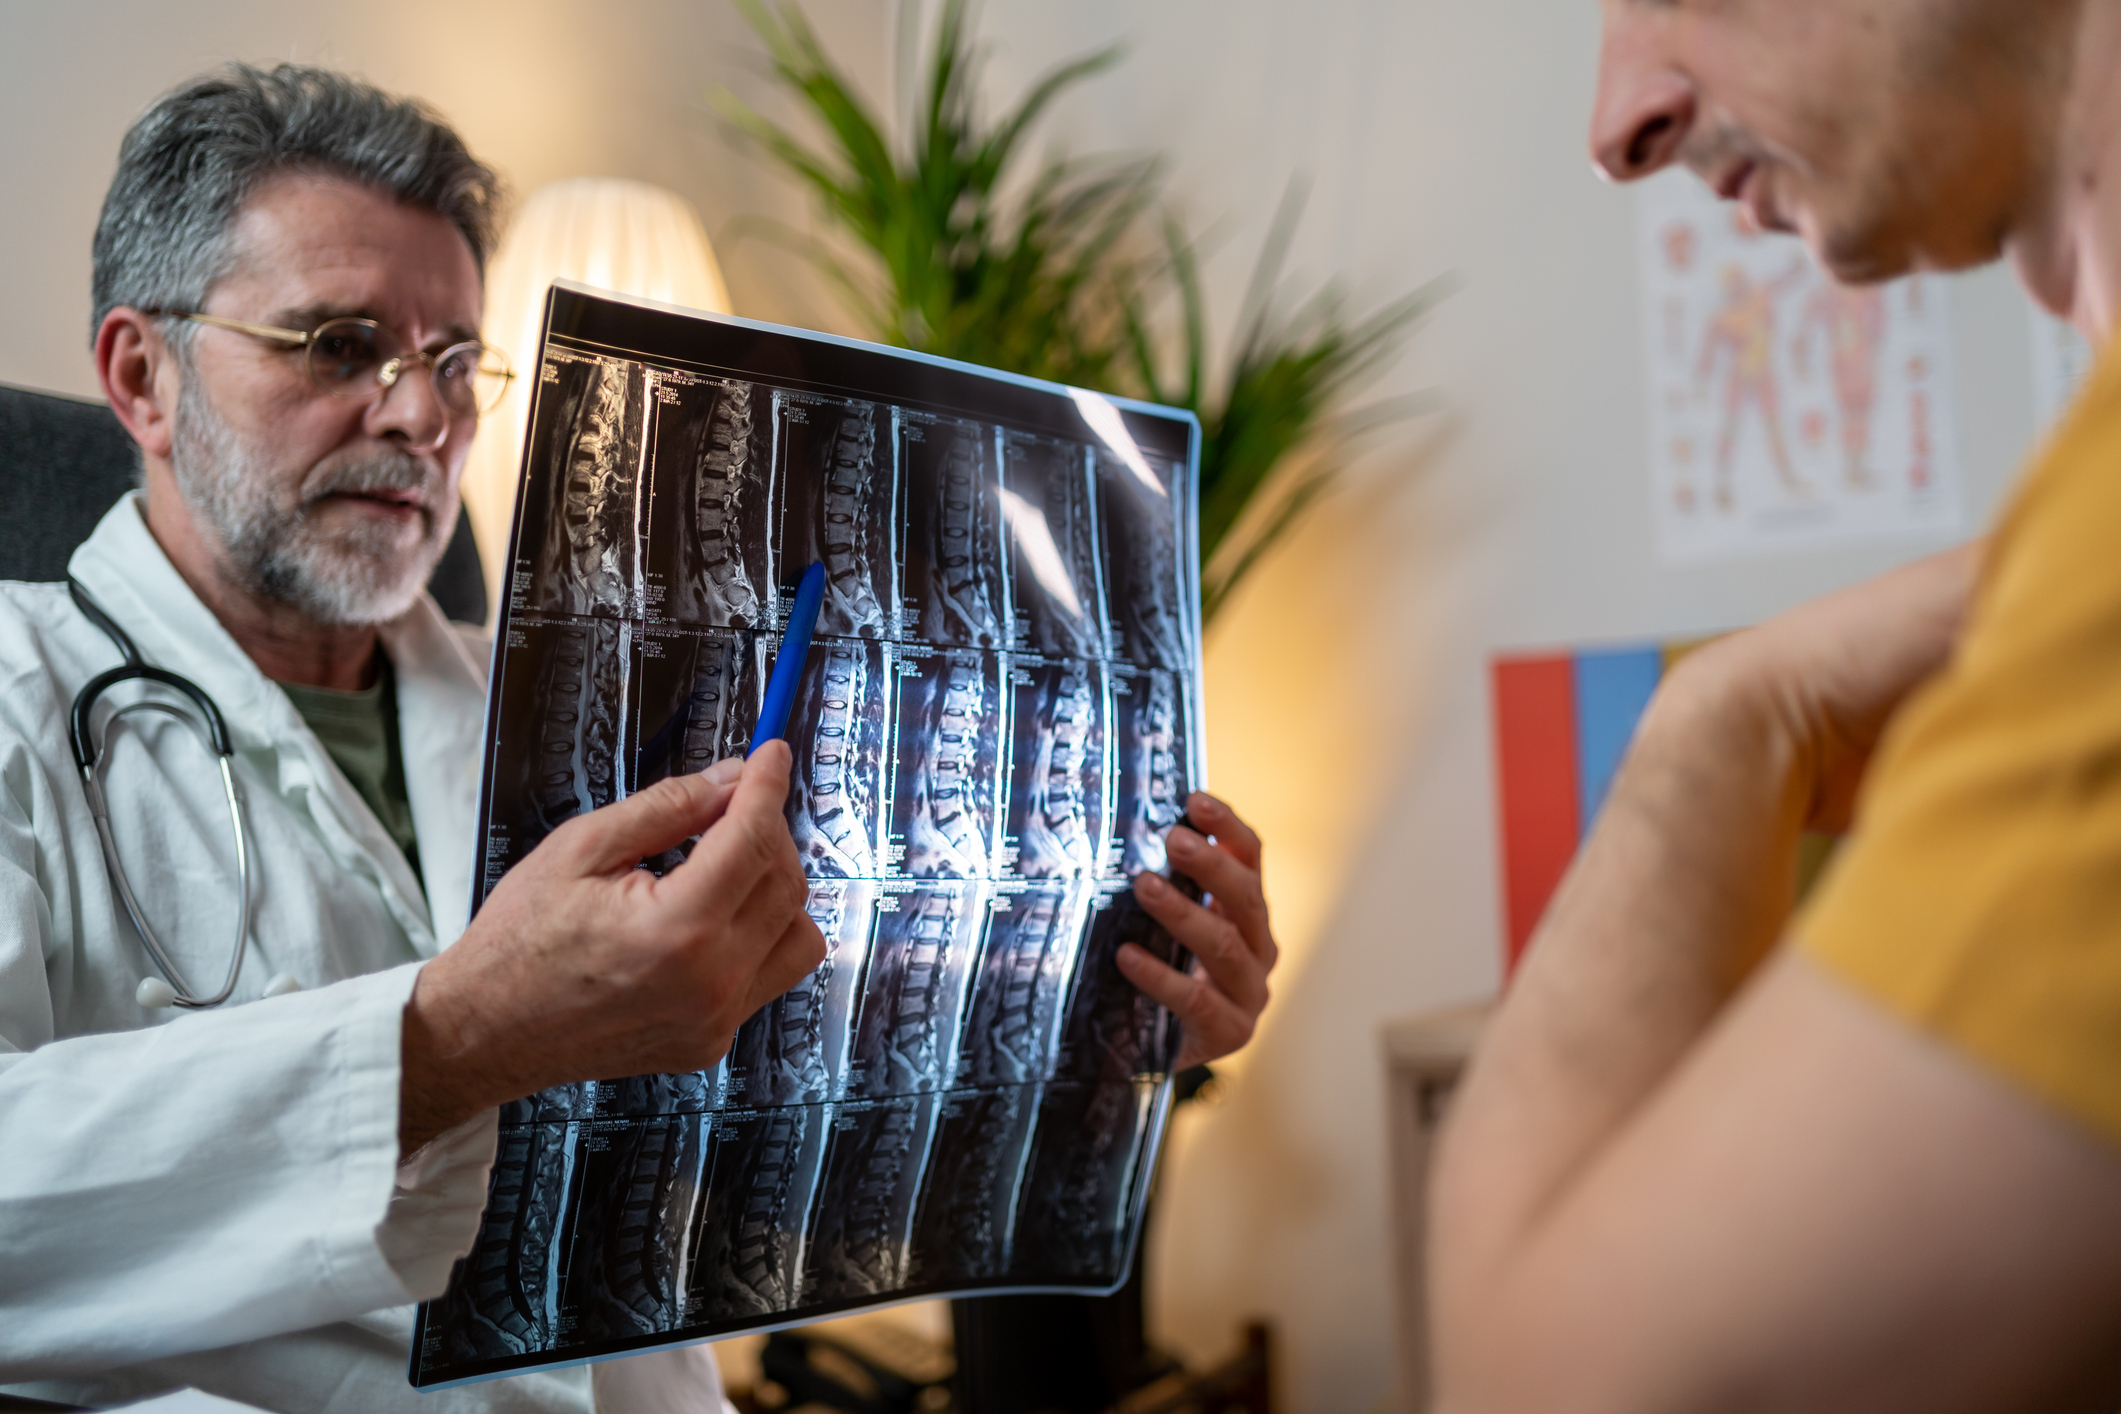 A doctor talking with patient, using a pen to point at a spinal cord scan